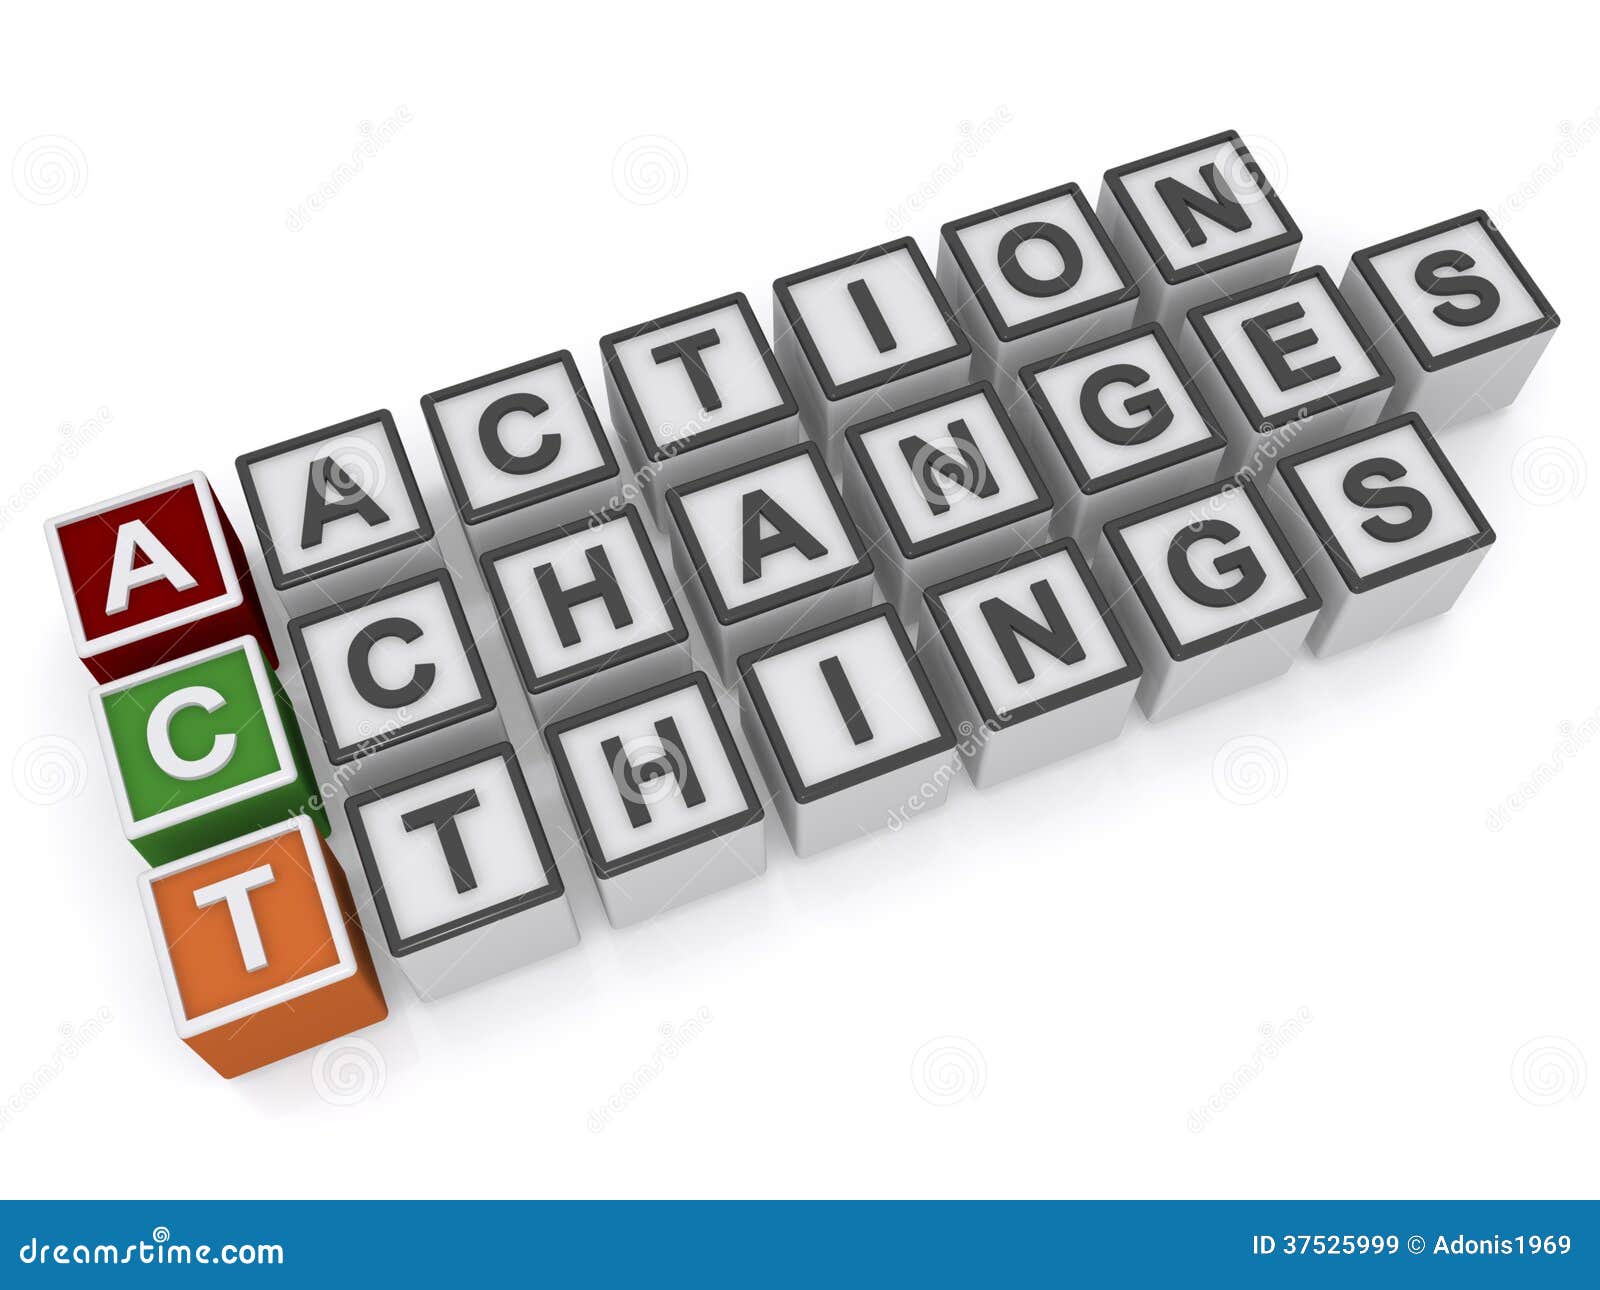 action changes things